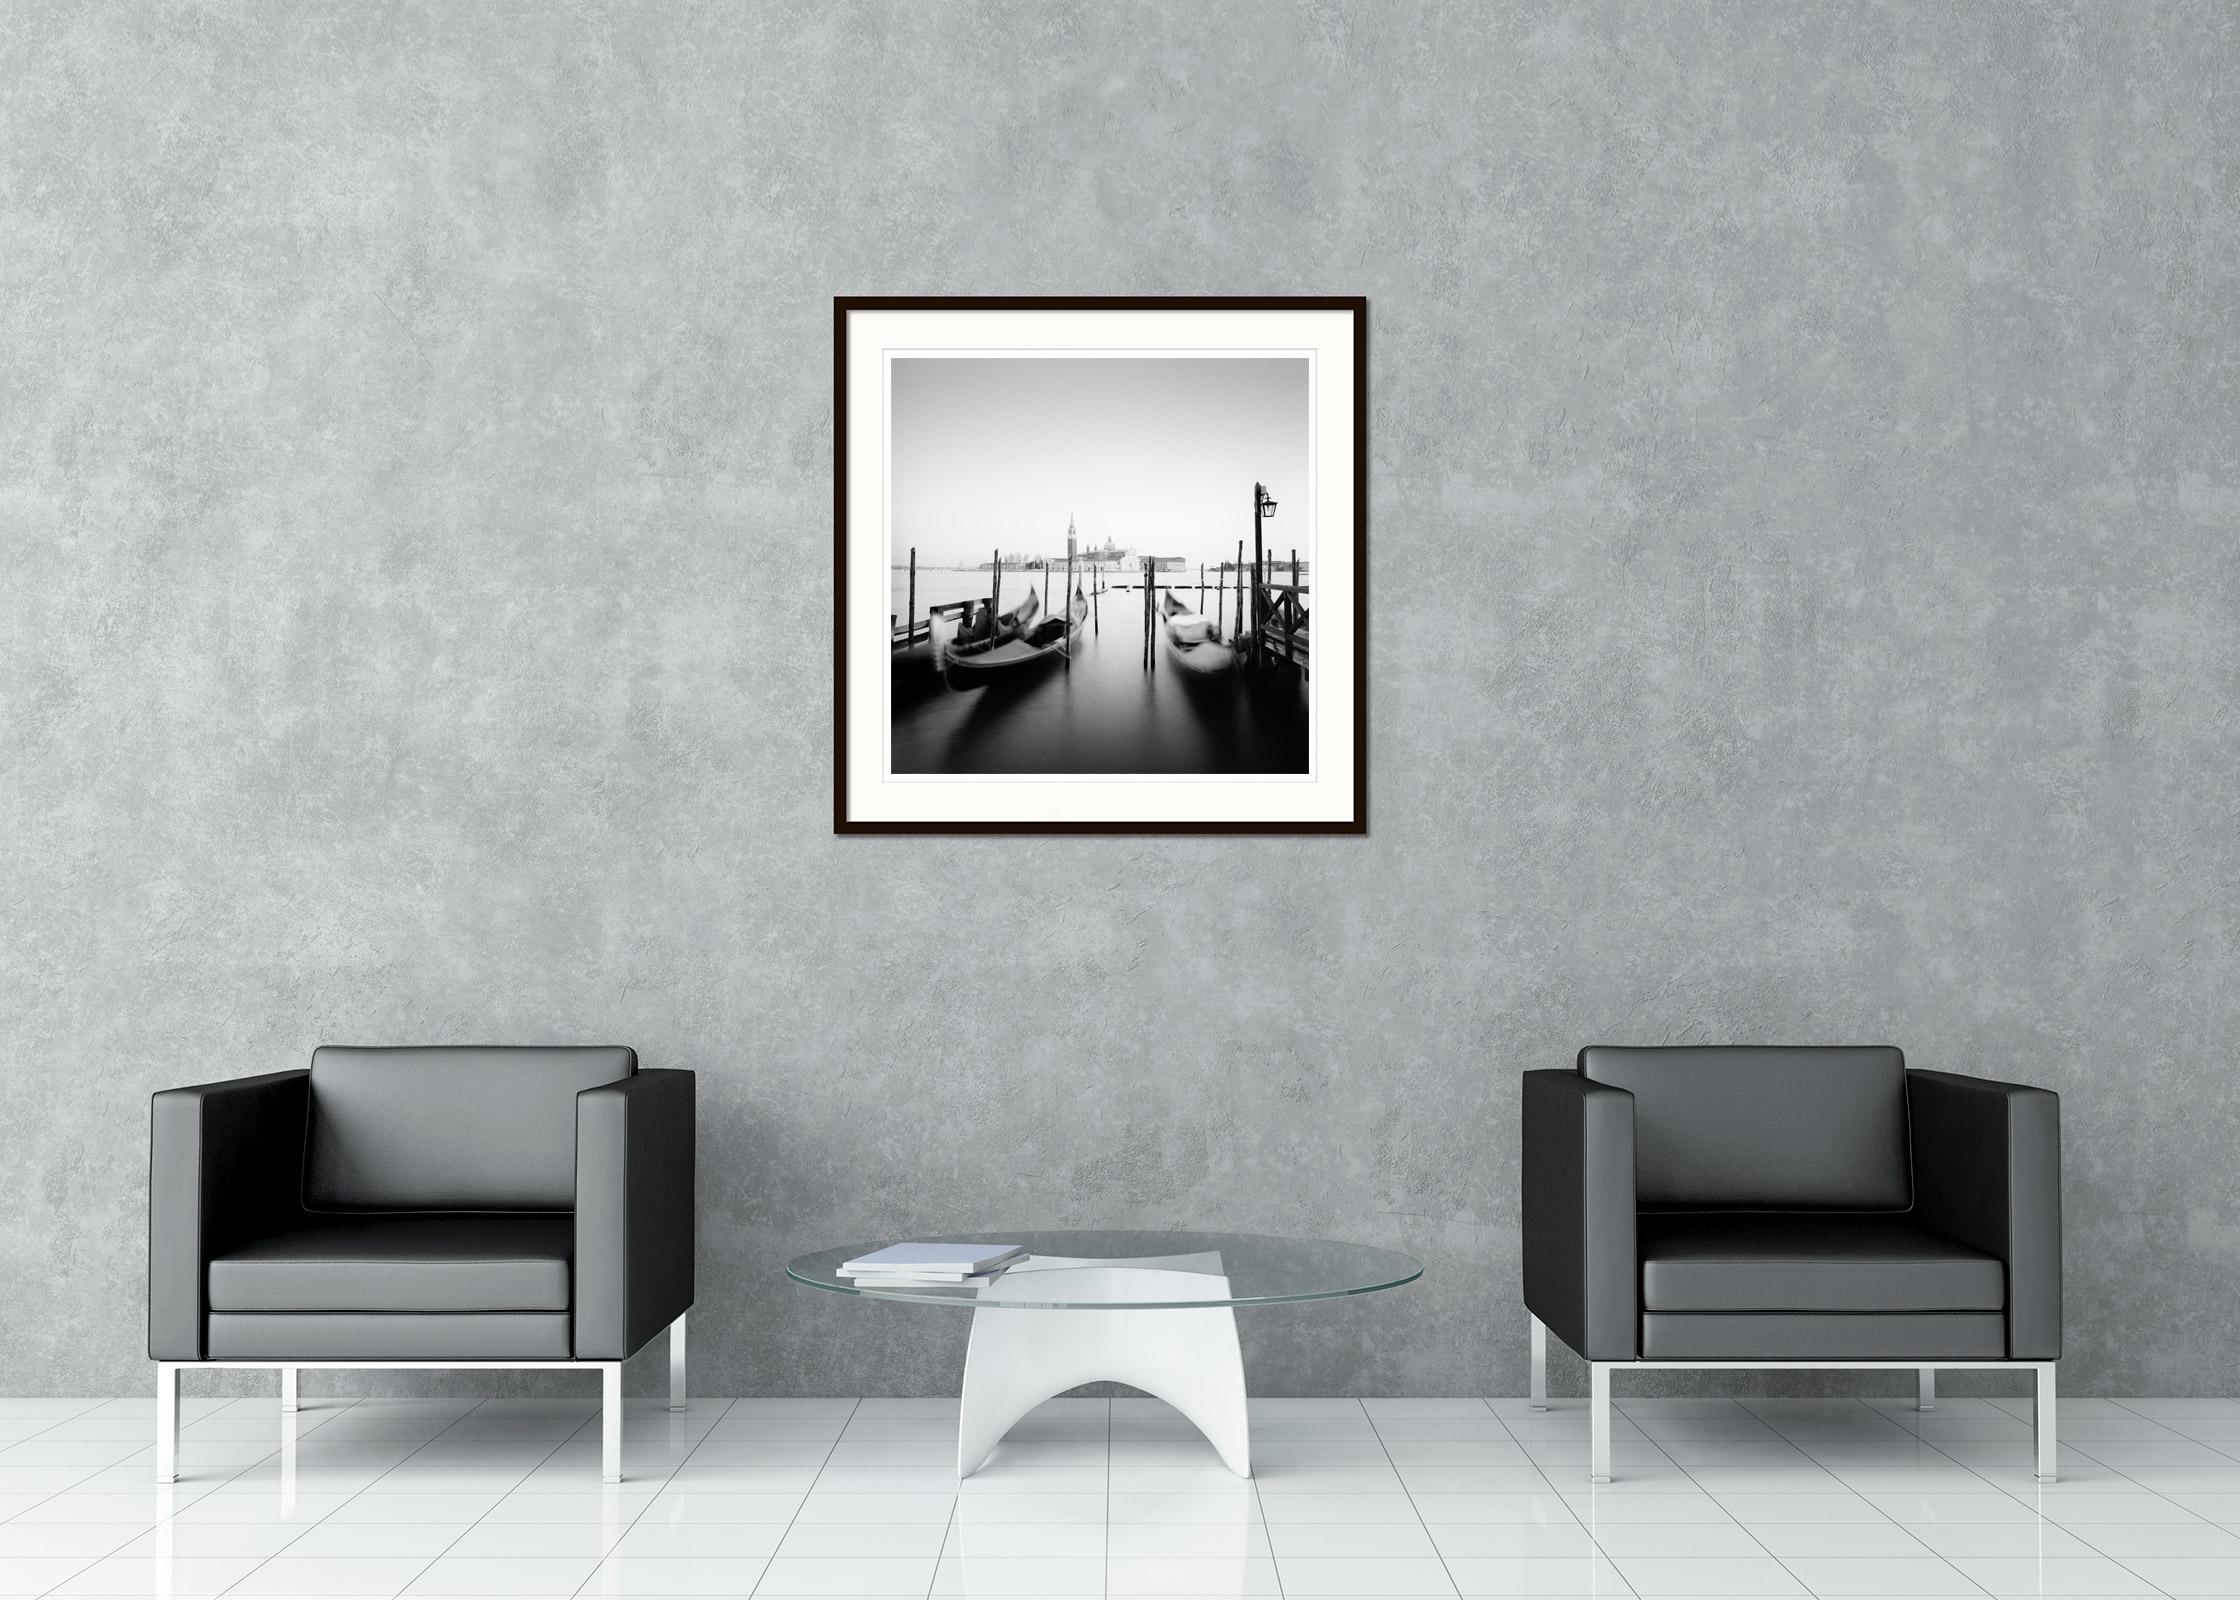 Black and white fine art long exposure waterscape - cityscape photography. Archival pigment ink print as part of a limited edition of 9. All Gerald Berghammer prints are made to order in limited editions on Hahnemuehle Photo Rag Baryta. Each print